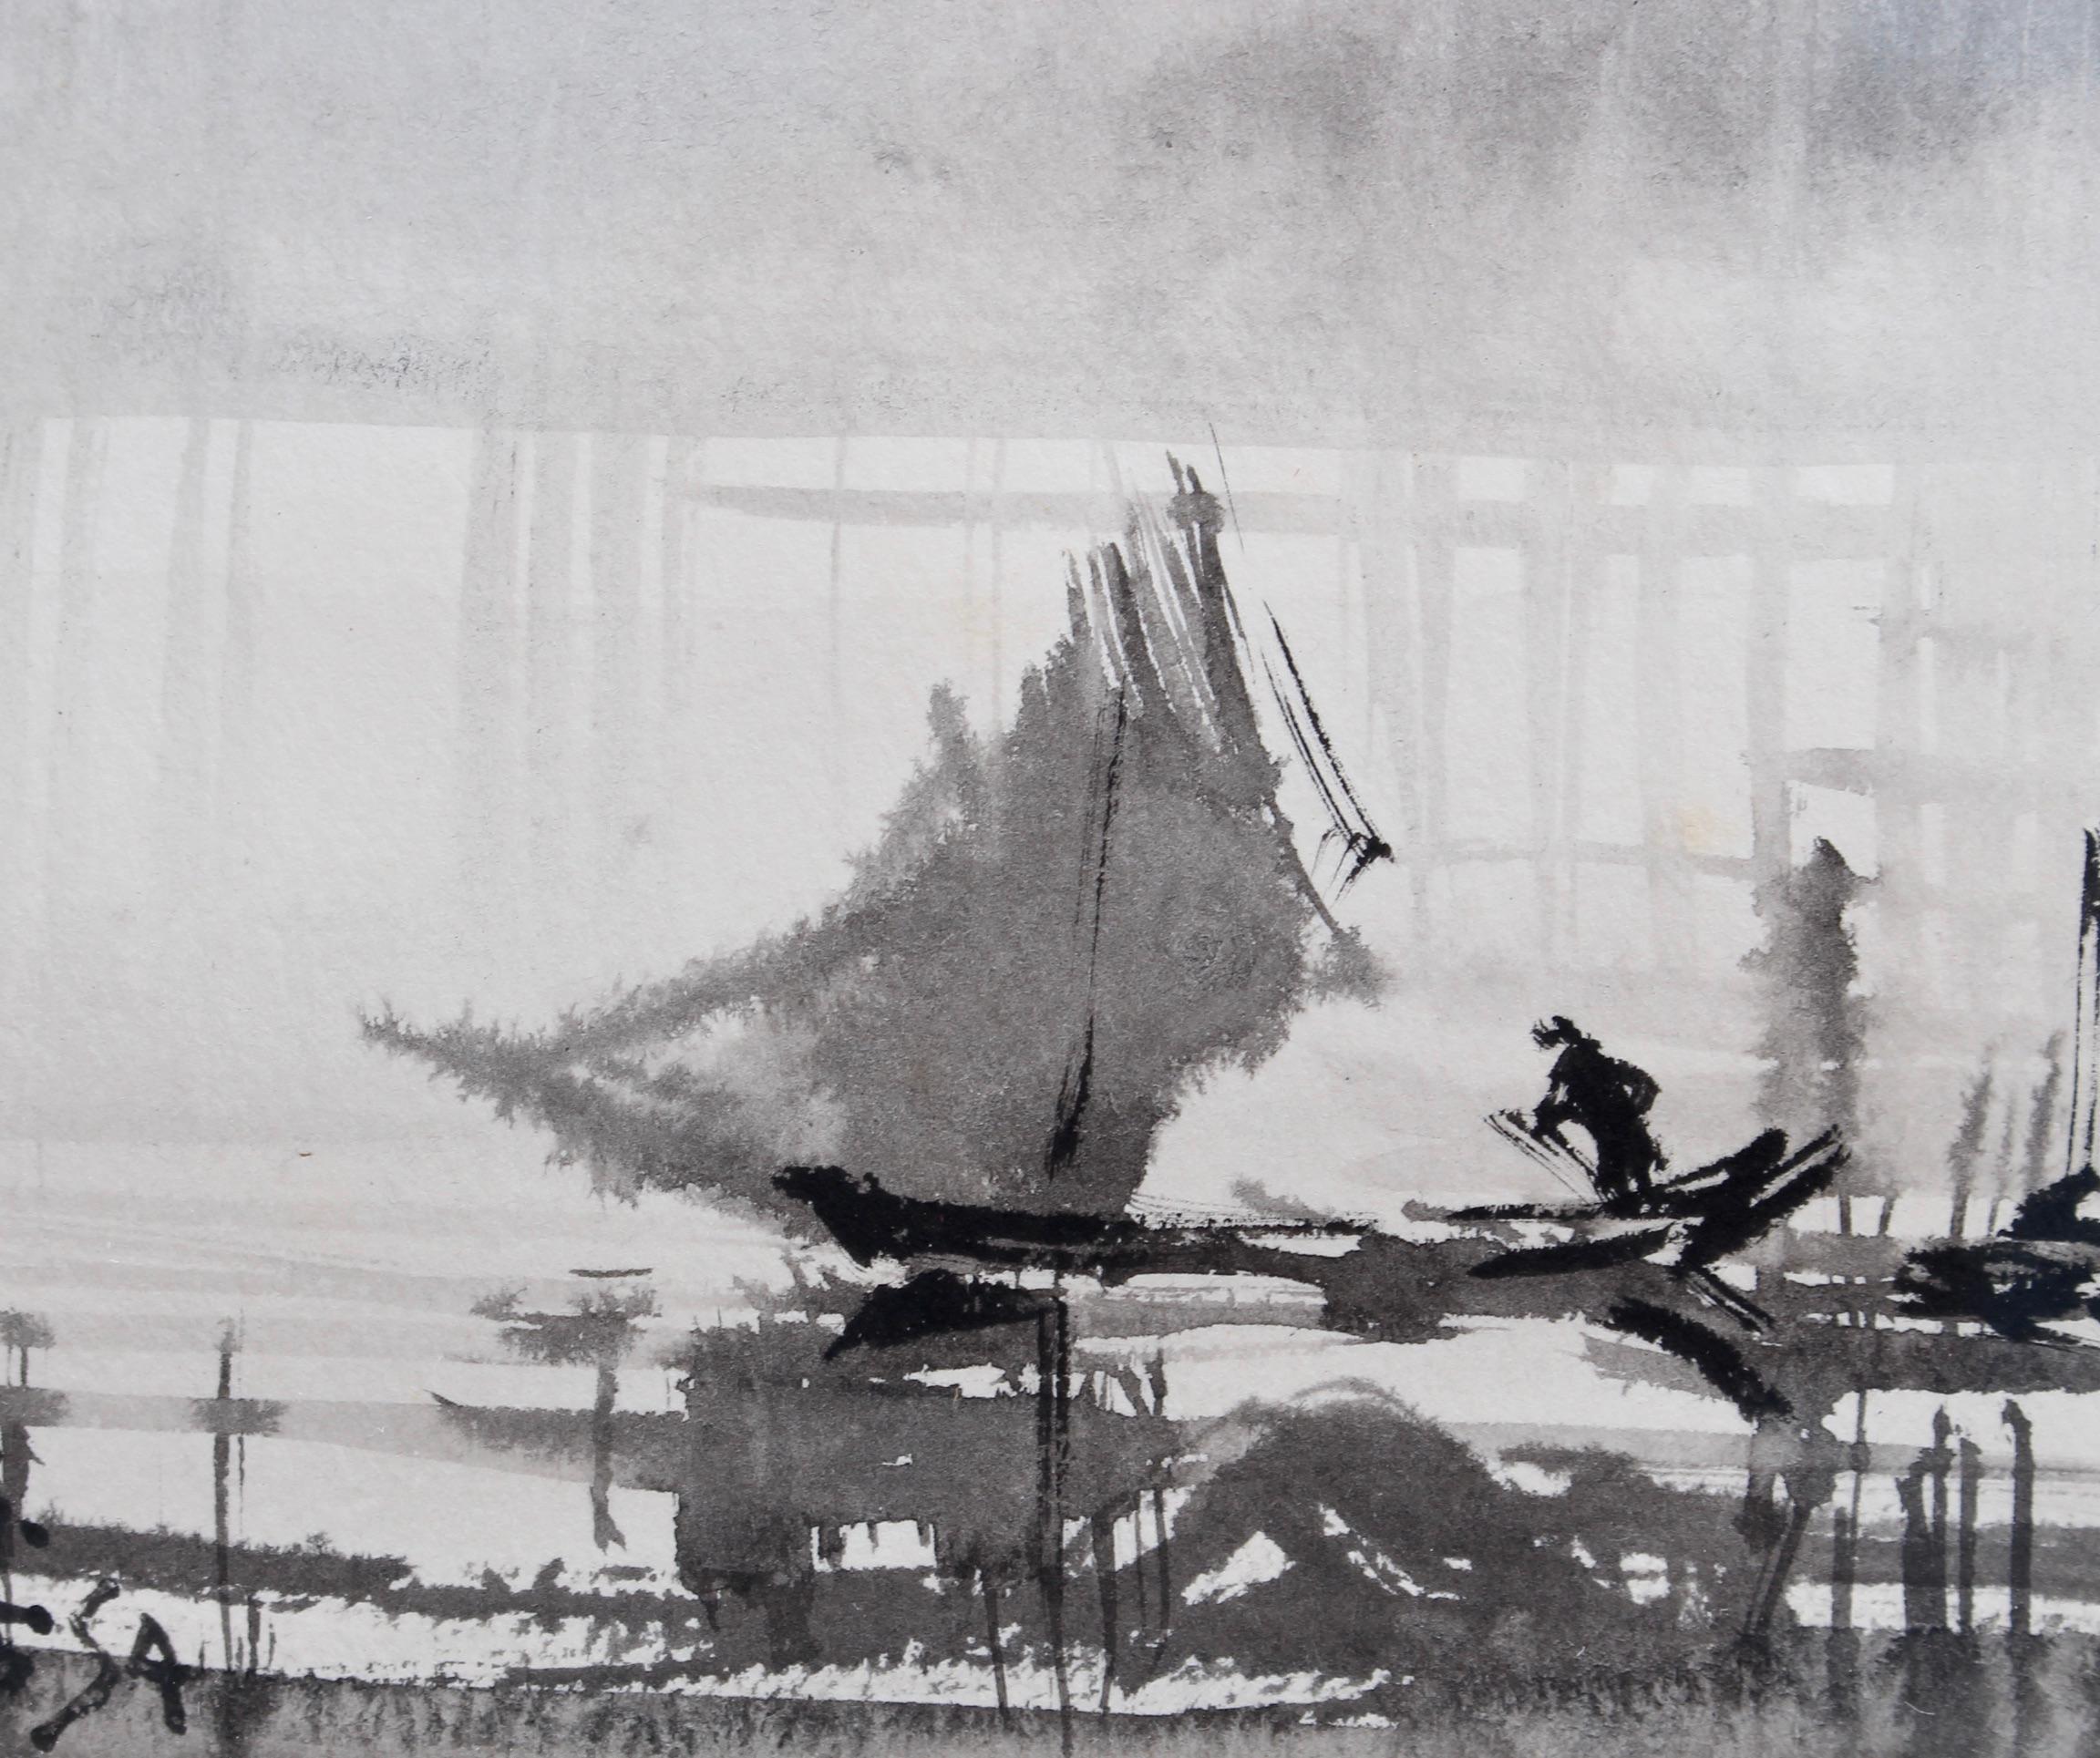 'Raining in Formosa on the Tamsui River' by Ran In-Ting (Lan Yinding, 藍蔭鼎) For Sale 7